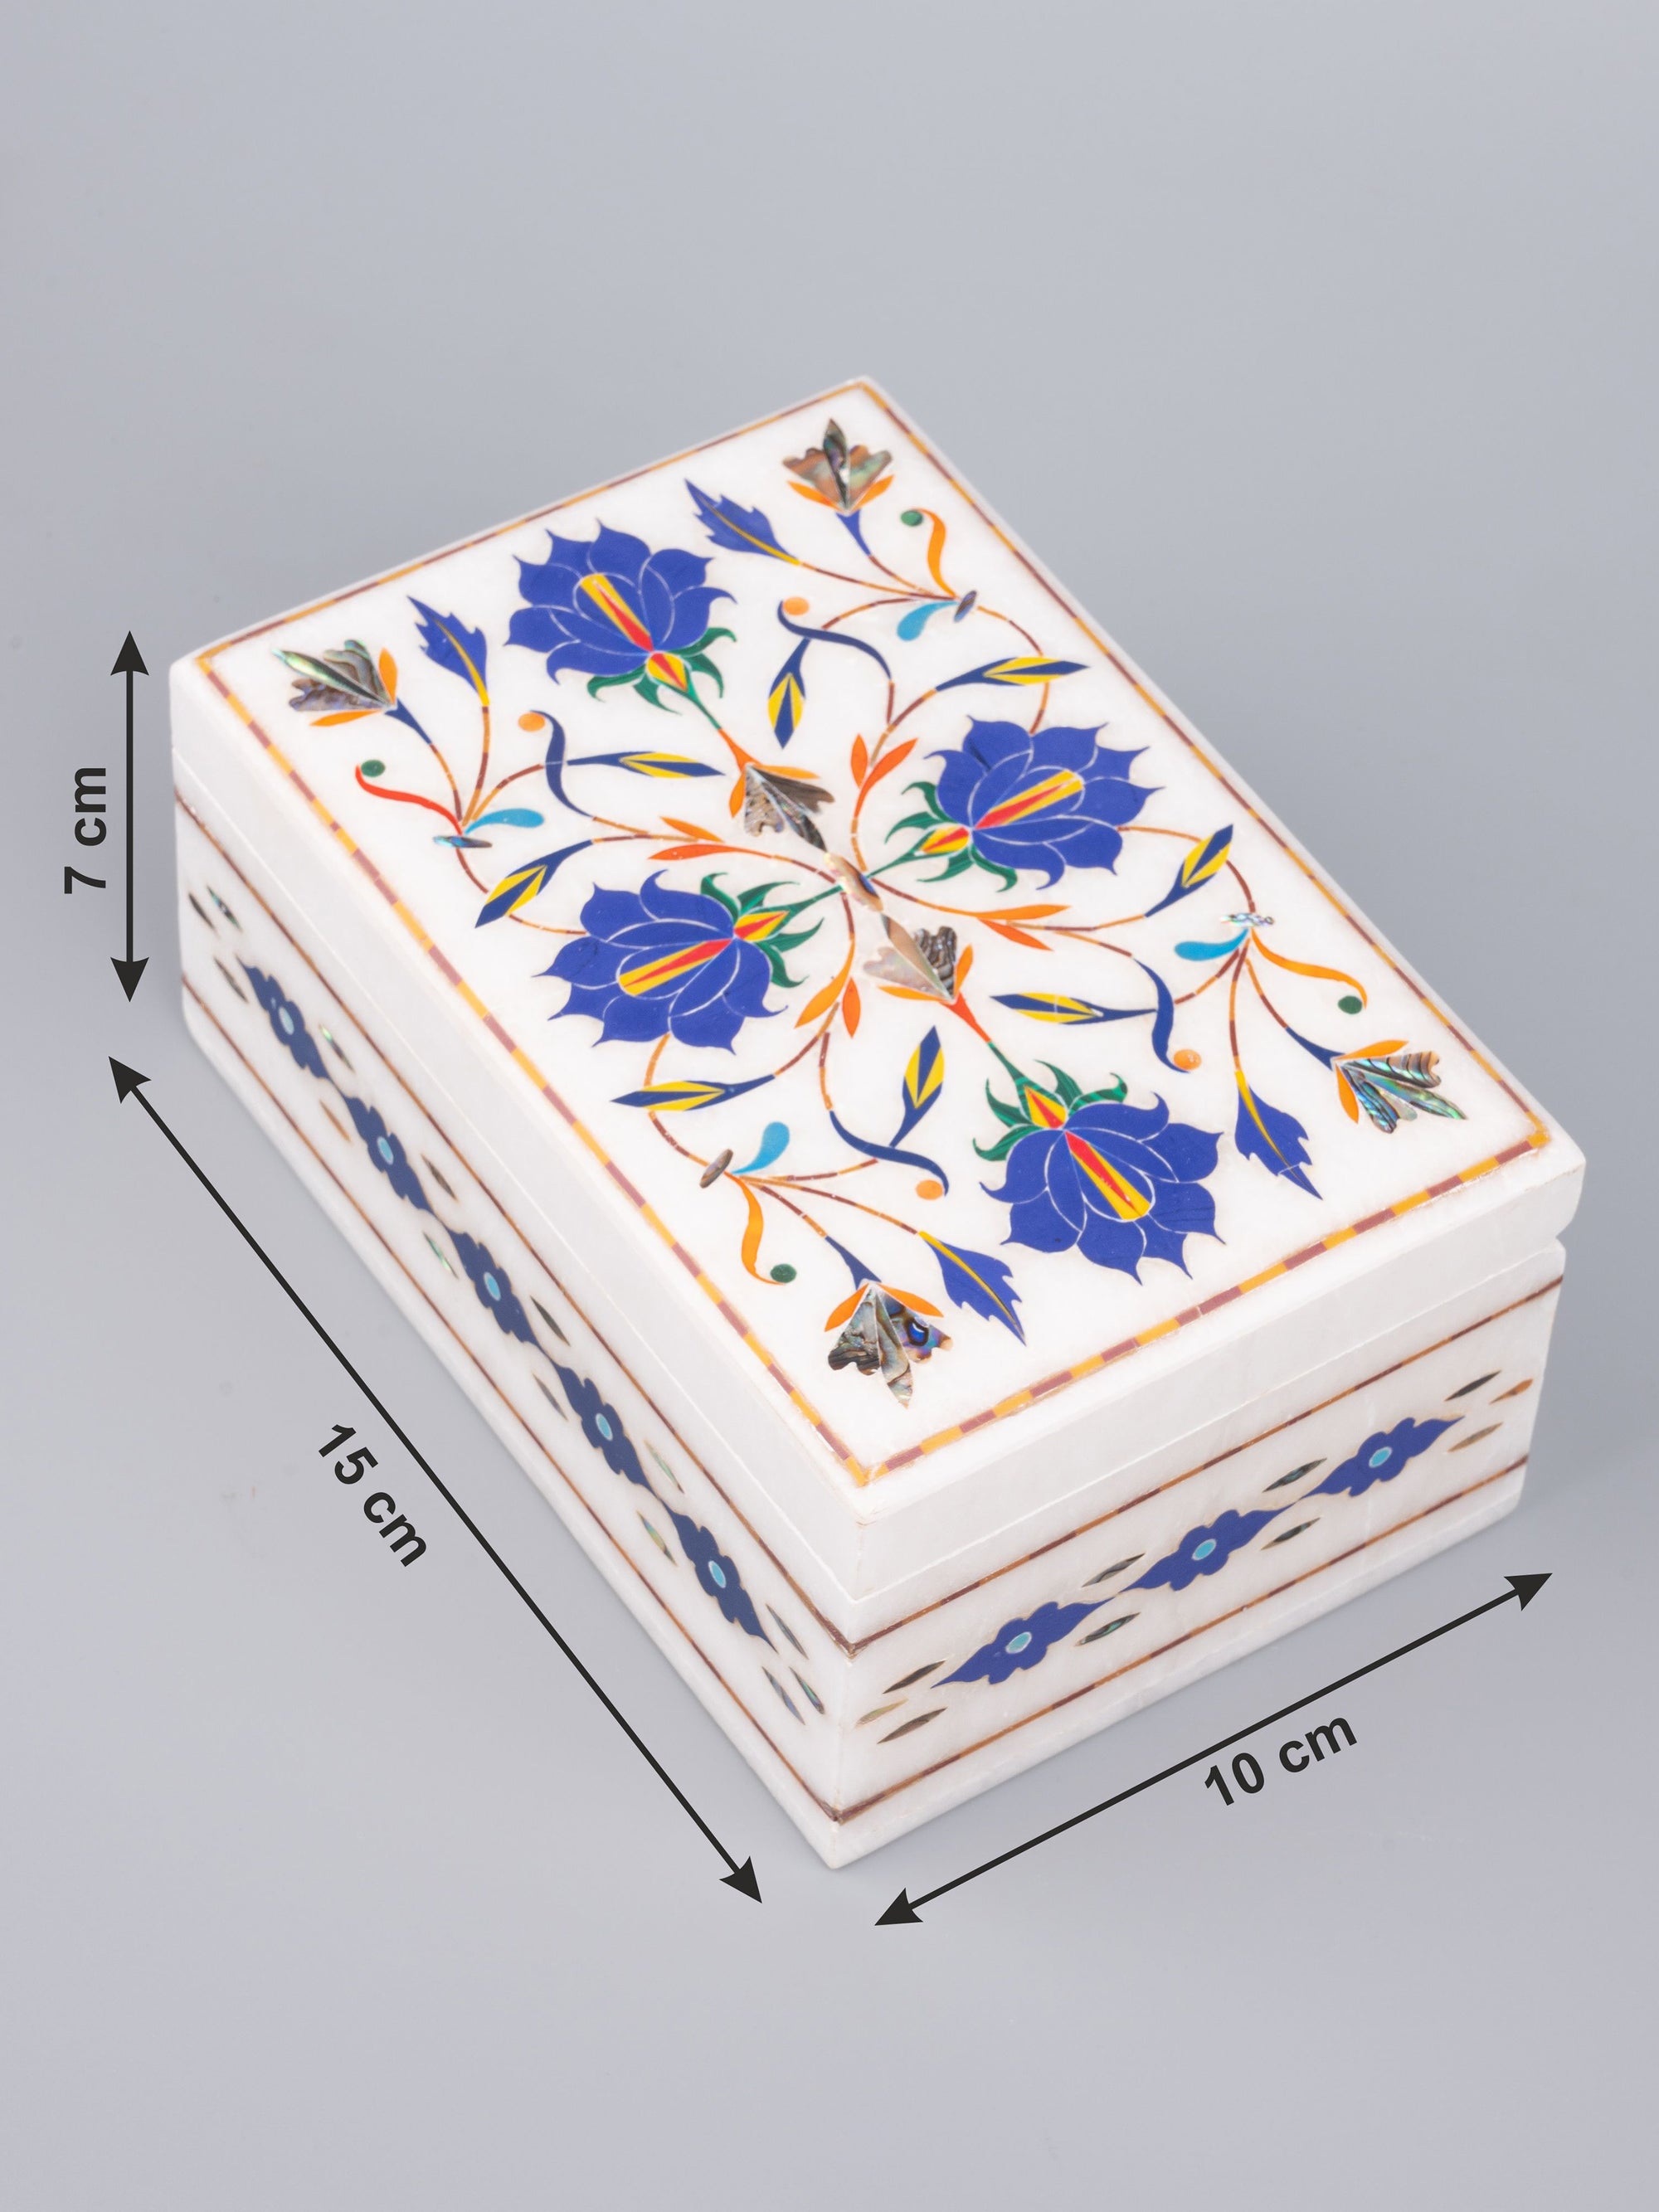 Colorful marble jewellery box with heavy inlay work - The Heritage Artifacts